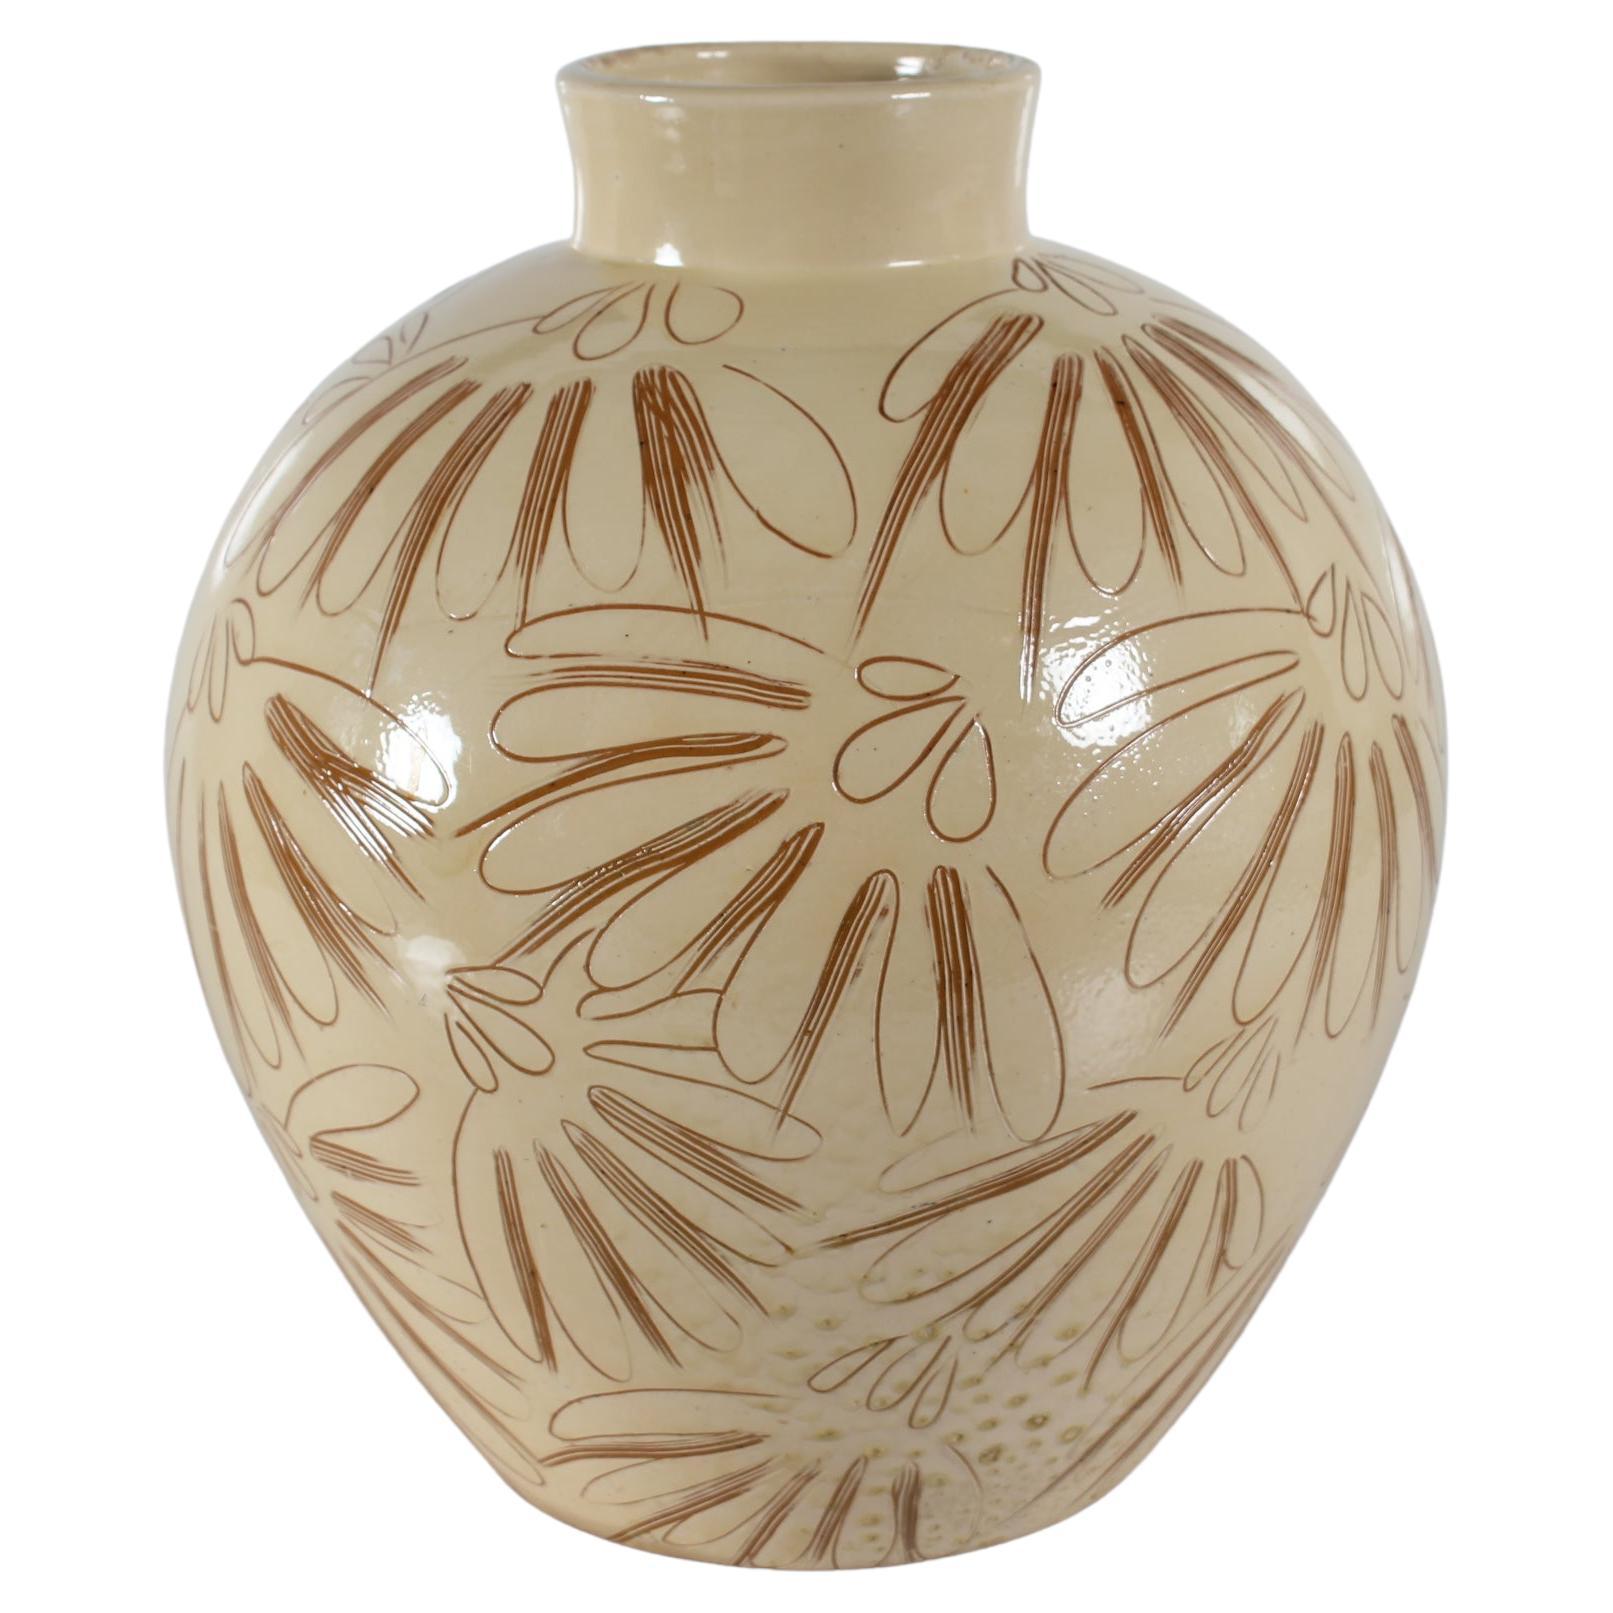 Large Herman A Kähler Sgraffito Floor Vase with Cream Yellow Glaze 1940-50s For Sale